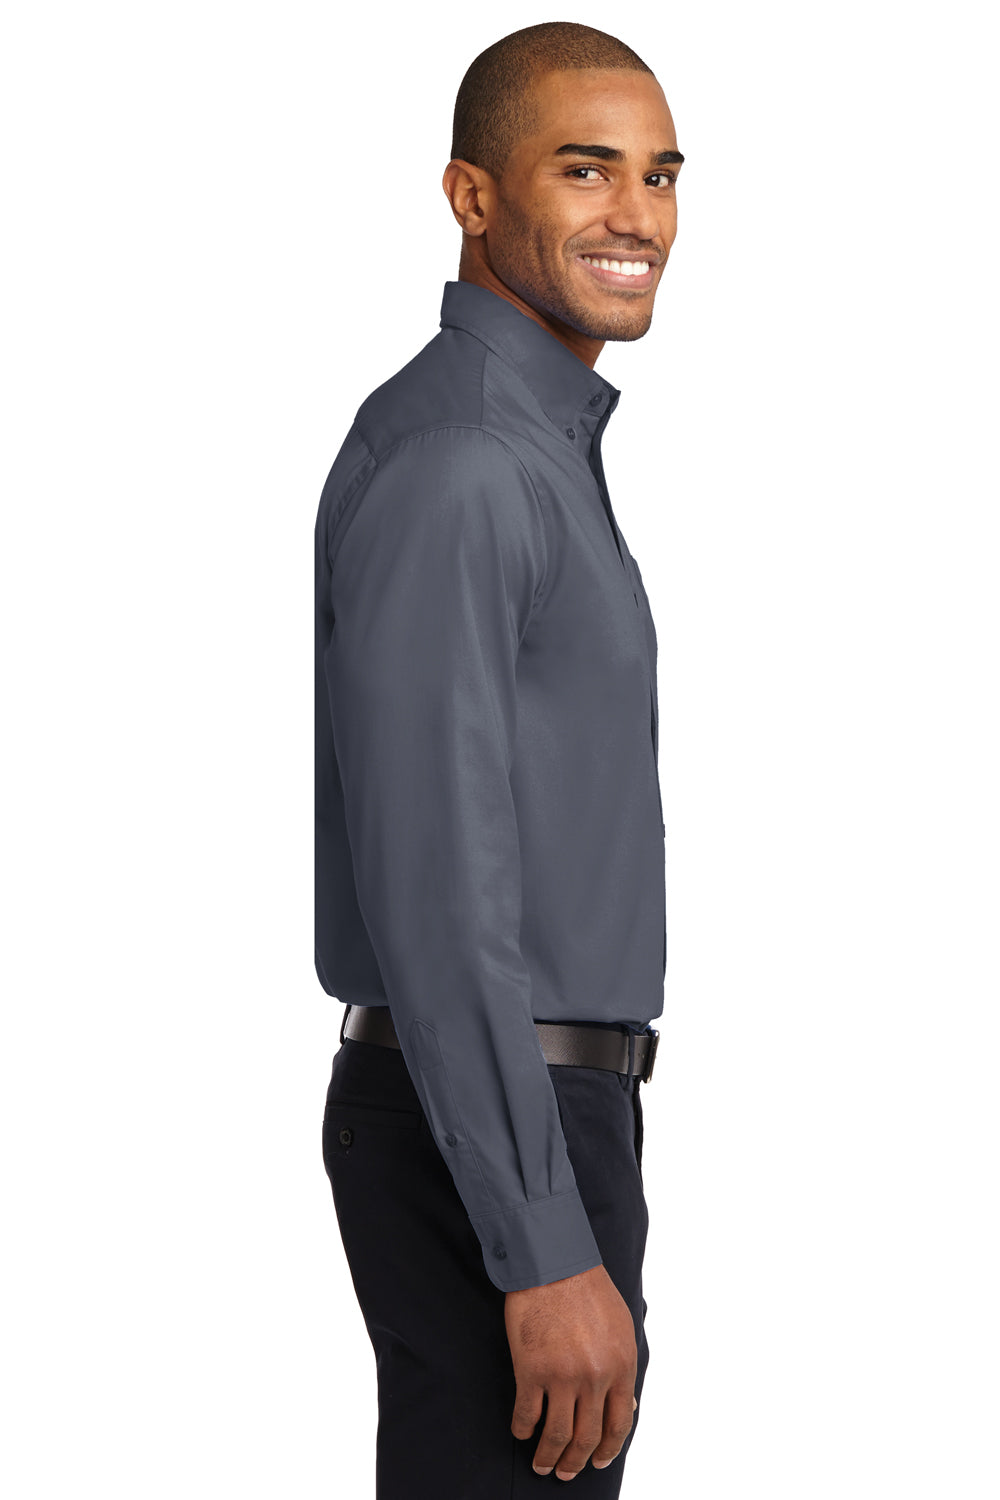 Port Authority S608/TLS608/S608ES Mens Easy Care Wrinkle Resistant Long Sleeve Button Down Shirt w/ Pocket Steel Grey Side